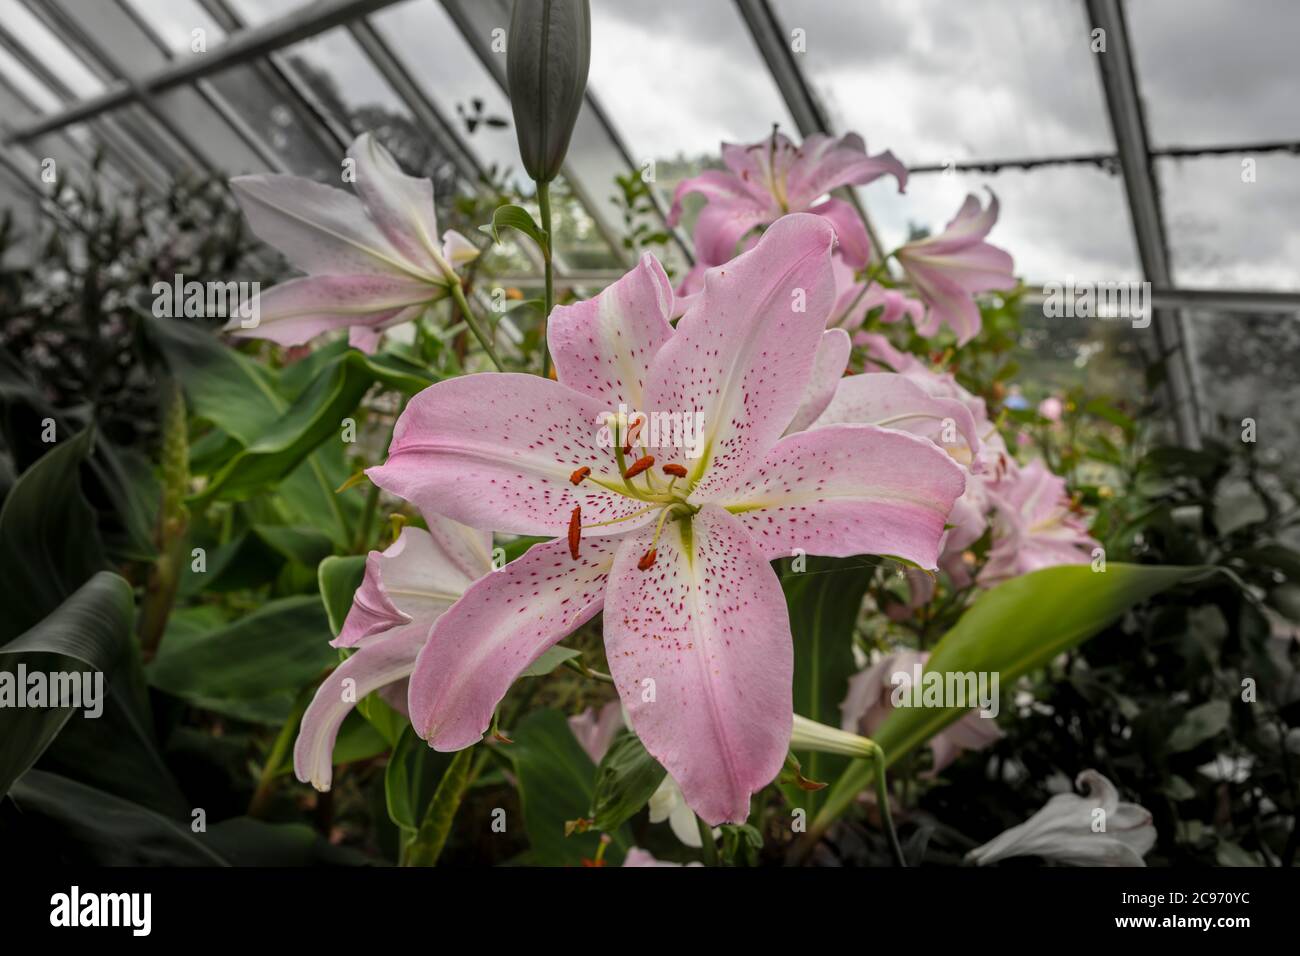 Large fragrant pink lily flower in hot house. Stock Photo